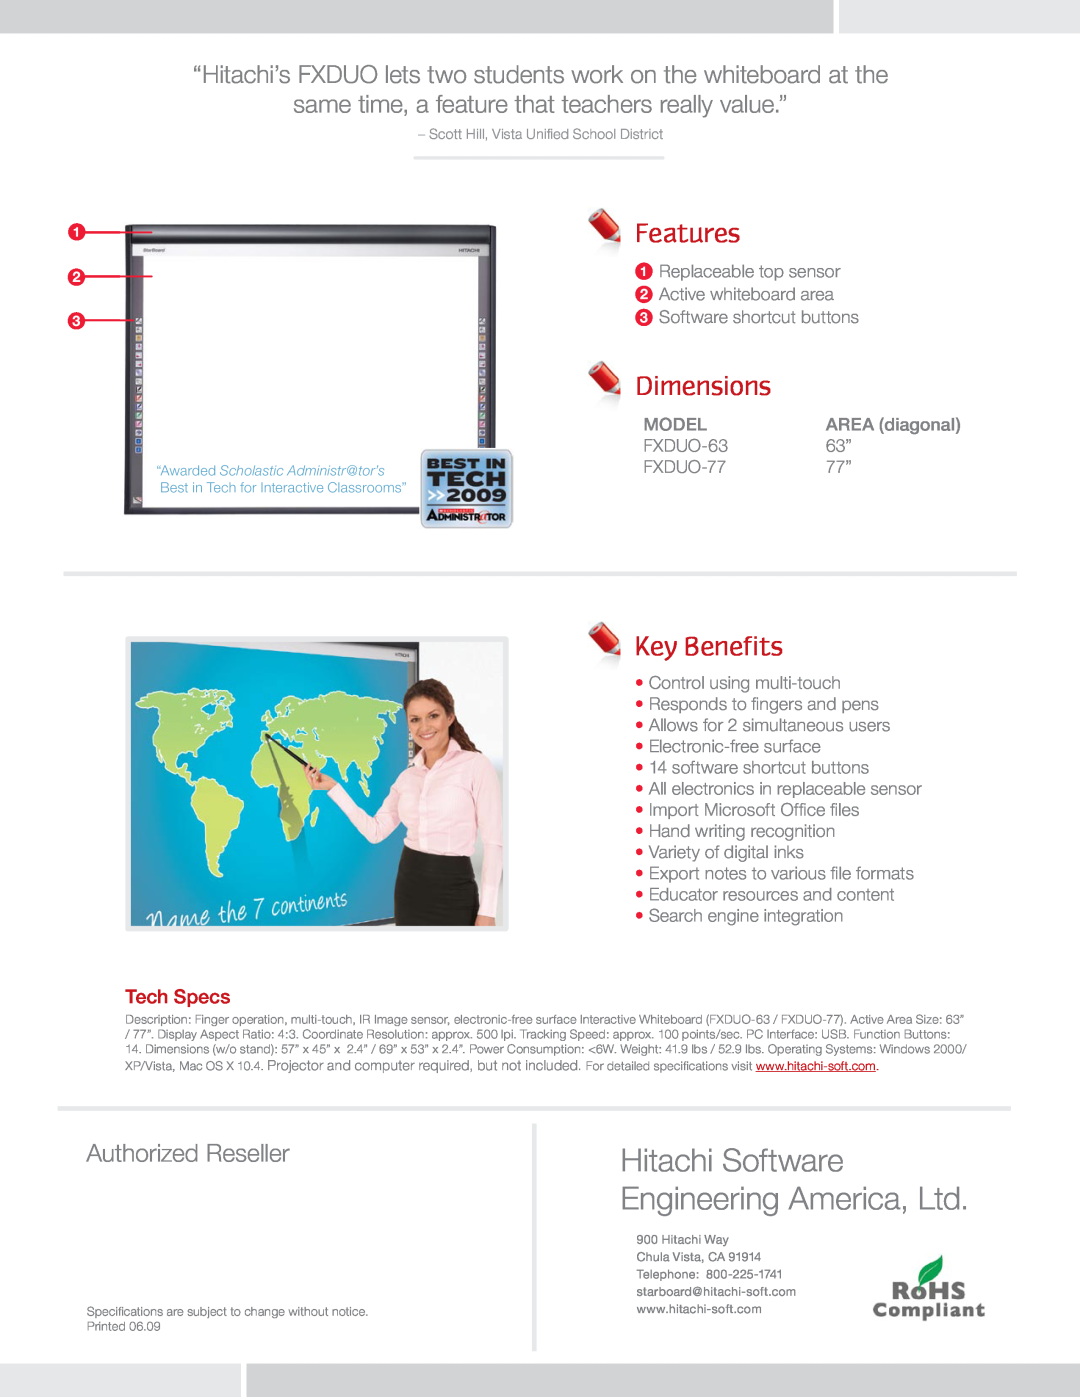 Hitachi FXDUO-63 Features, Dimensions, Key Benefits, “Hitachi’s FXDUO lets two students work on the whiteboard at the 